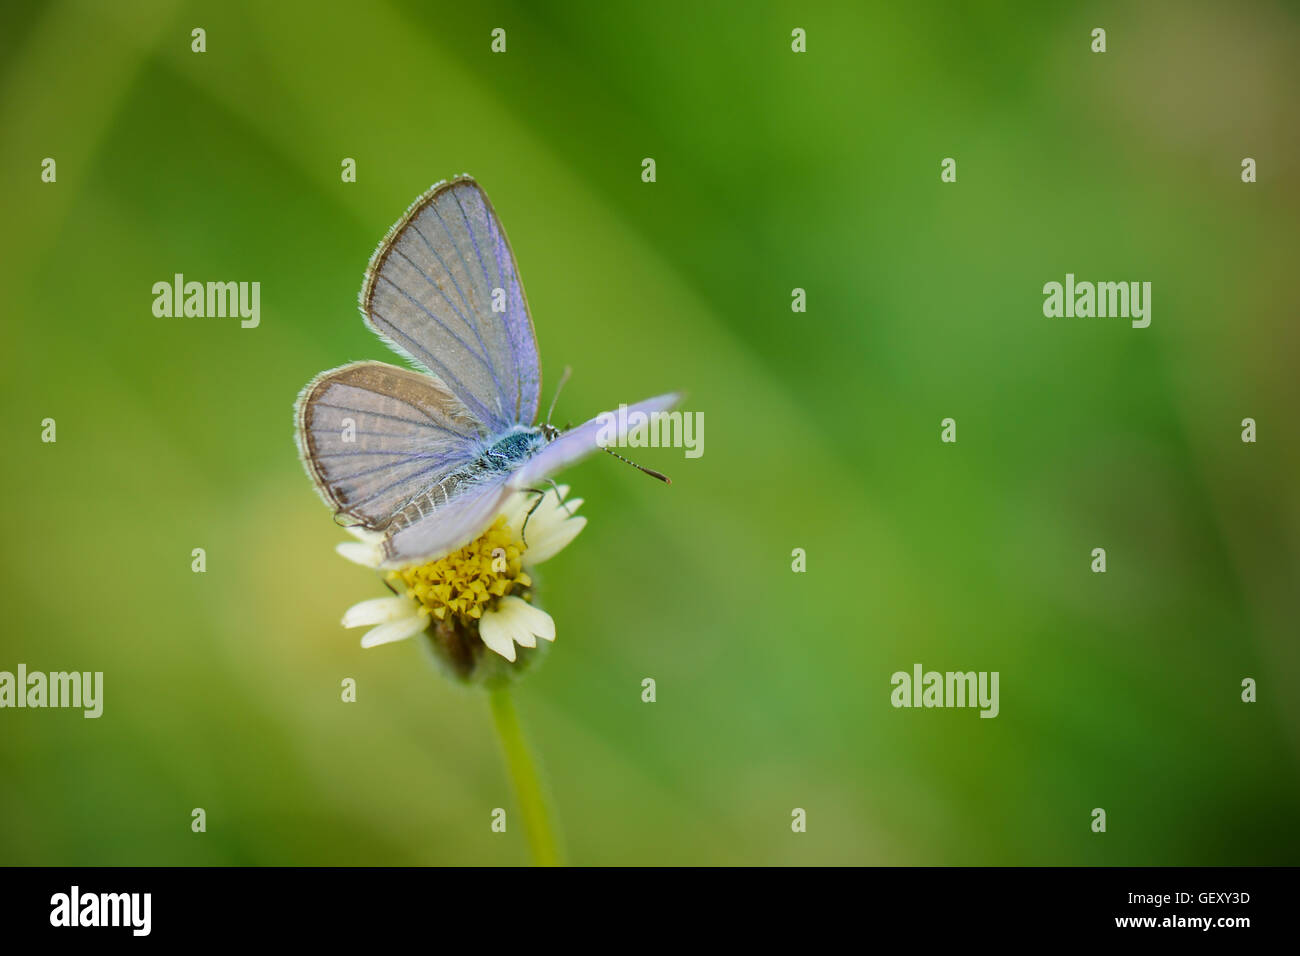 Small butterfly on small flower with natural green background. Stock Photo